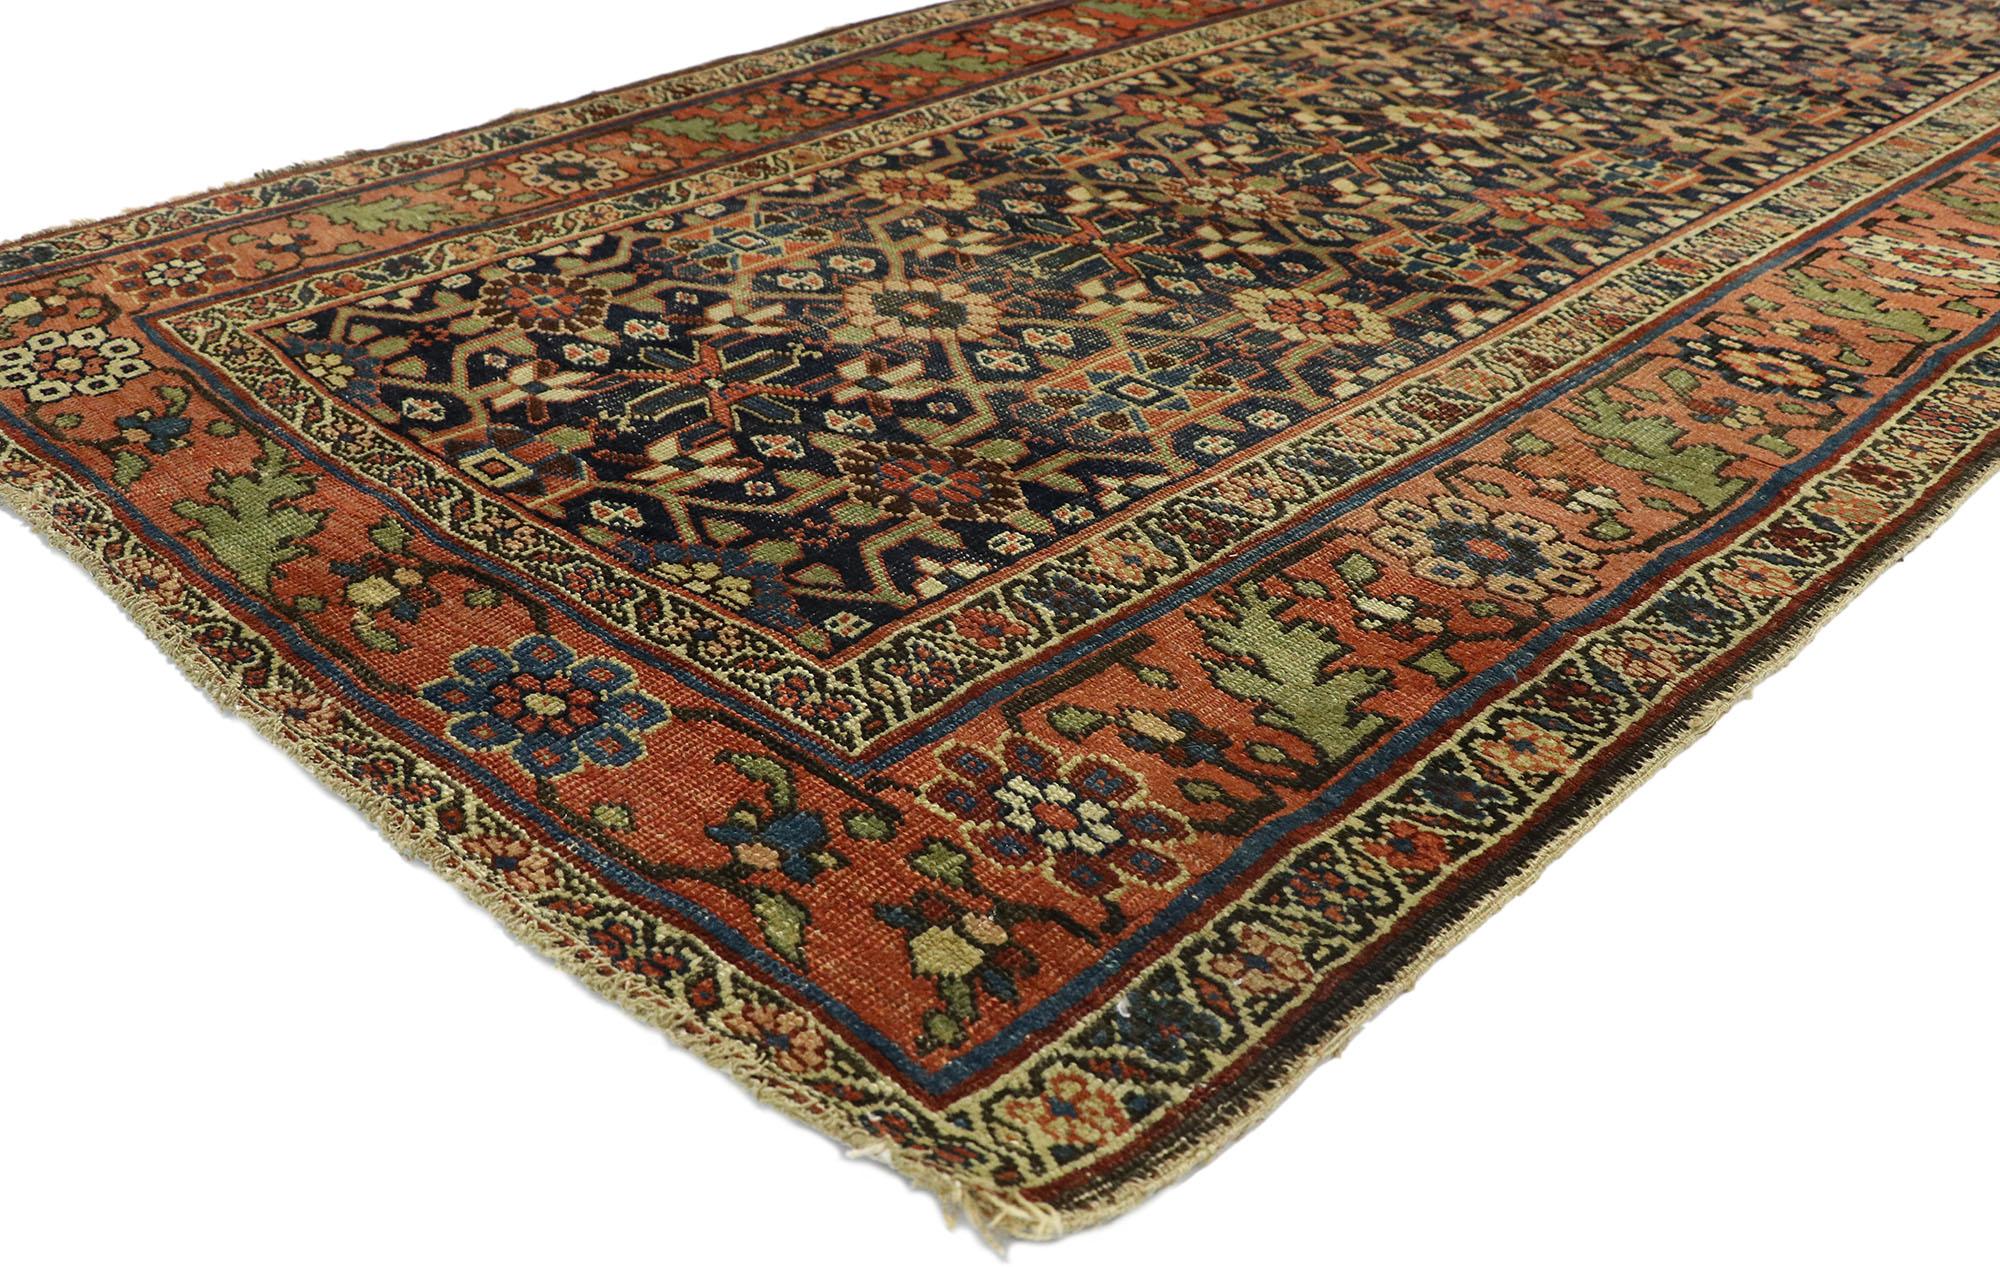 76969 Antique Persian Bijar Runner with Traditional Modern Style 03'09 x 14'03. Create a comfortable and modern setting with this antique Persian Bijar carpet runner. With its impressive traditional modern style and long length, this antique Persian